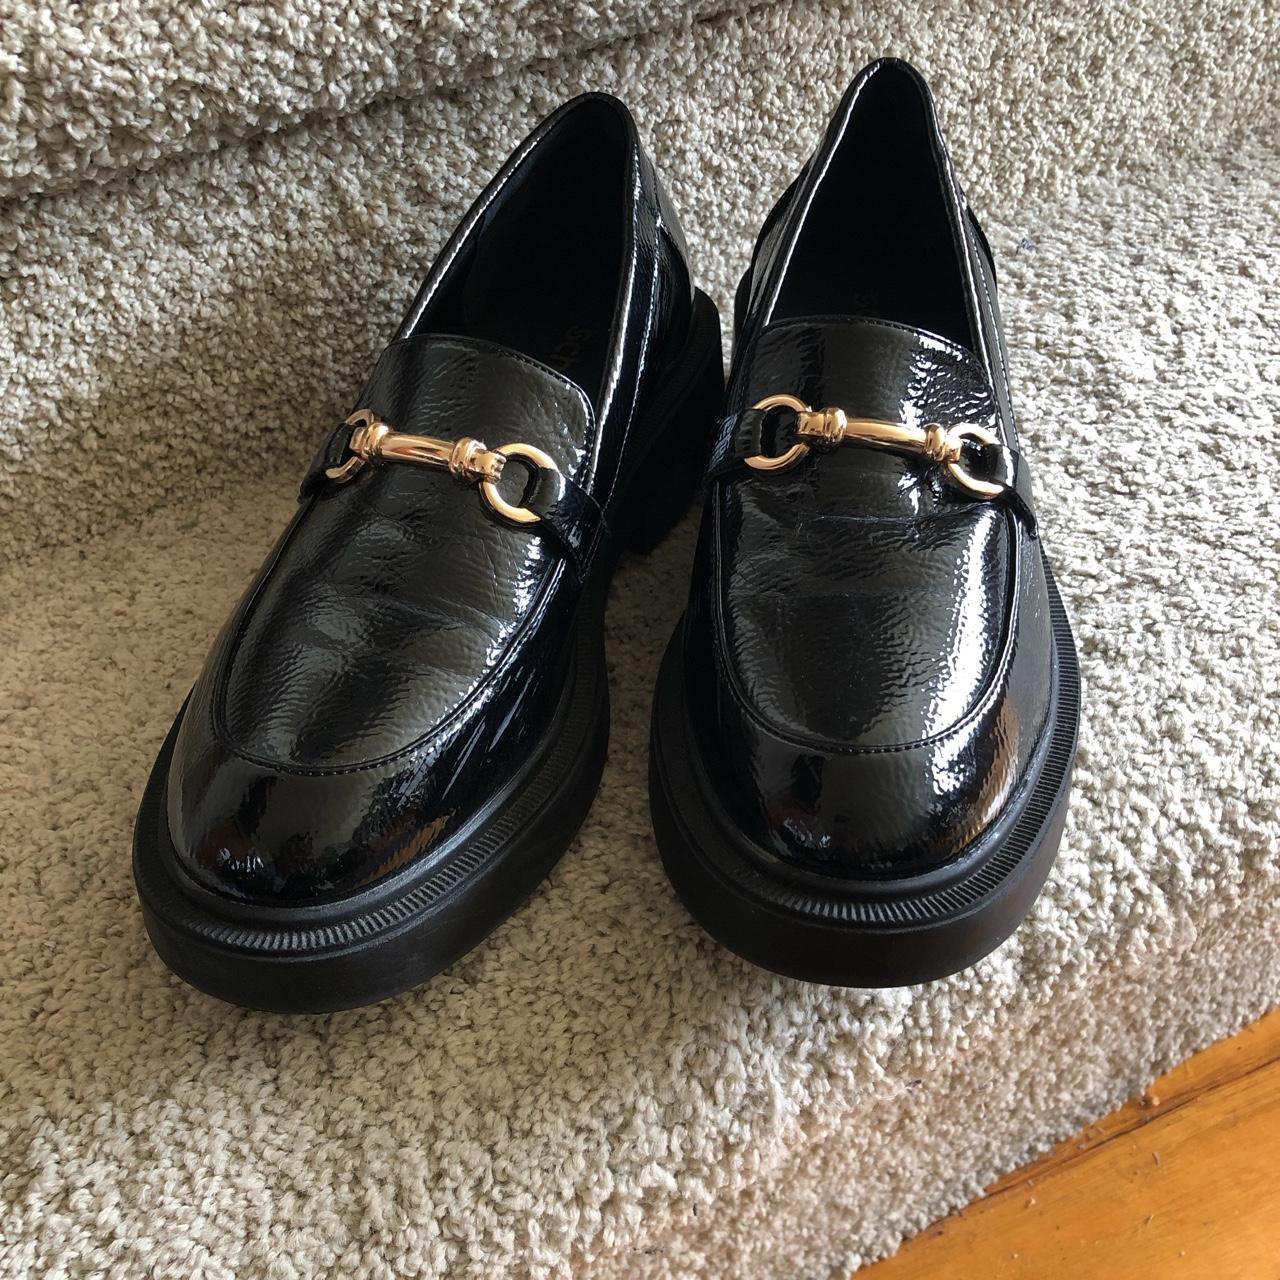 Schuh Faux leather loafers. Size 38. - Depop